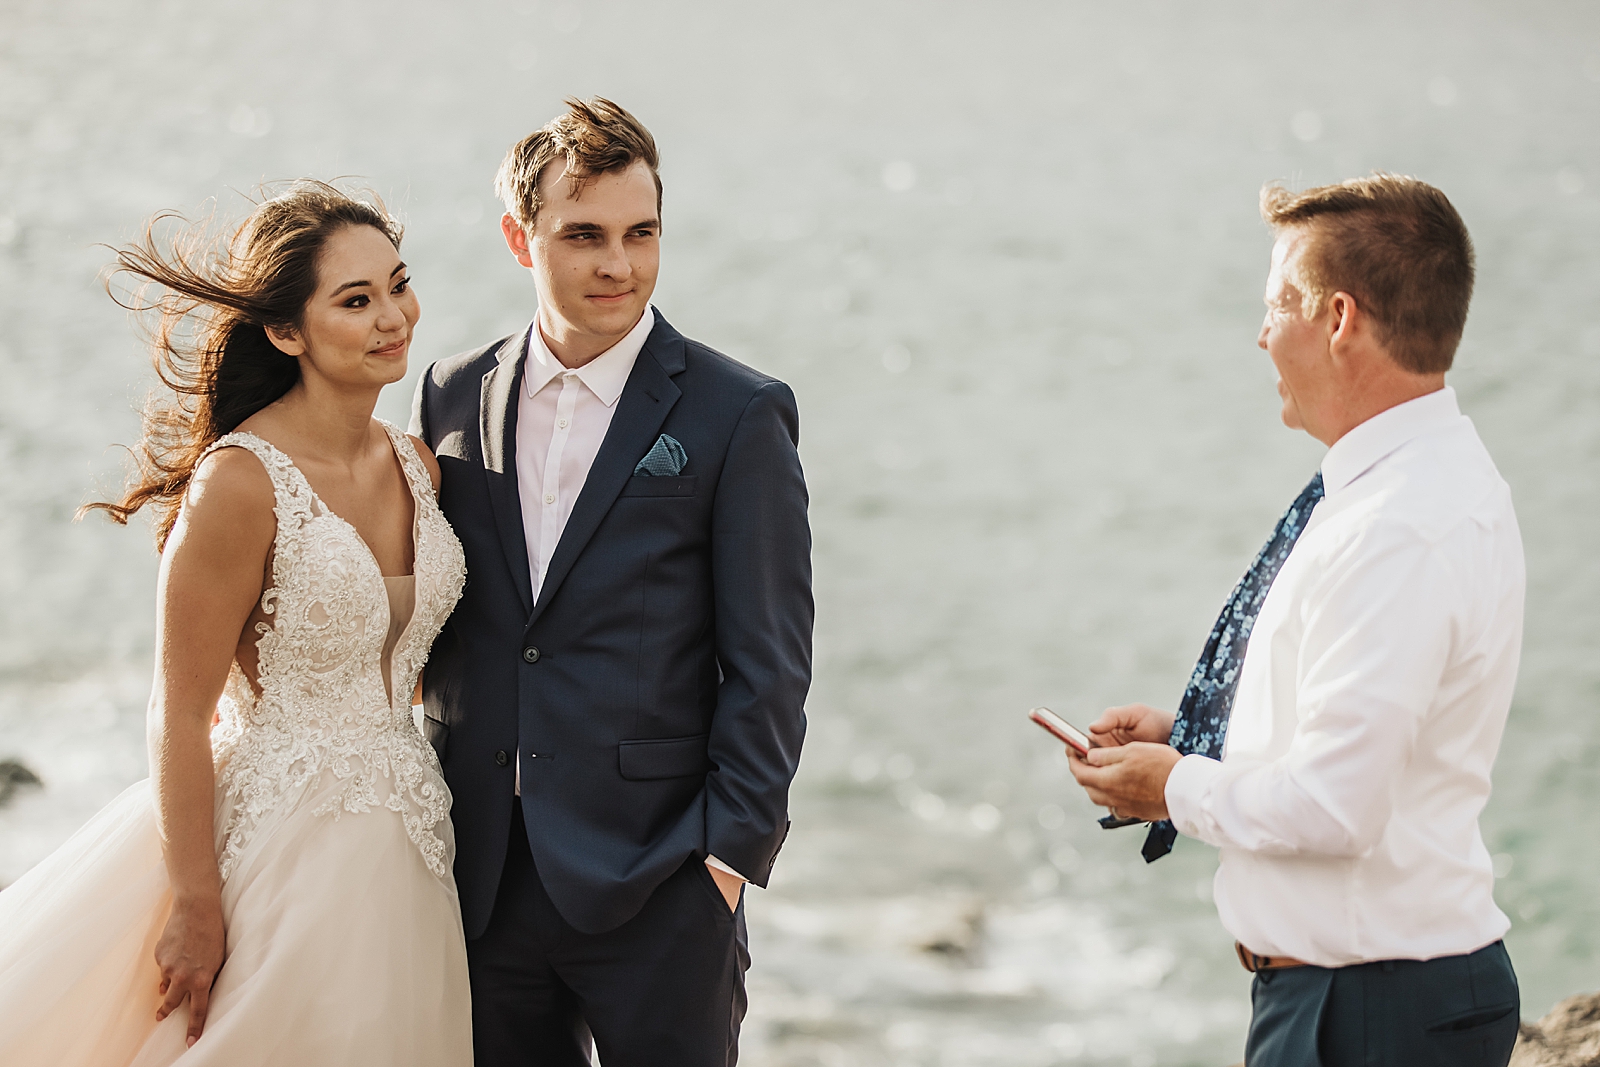 Bride and Groom standing side by side for seaside Elopement Ceremony with Officiant